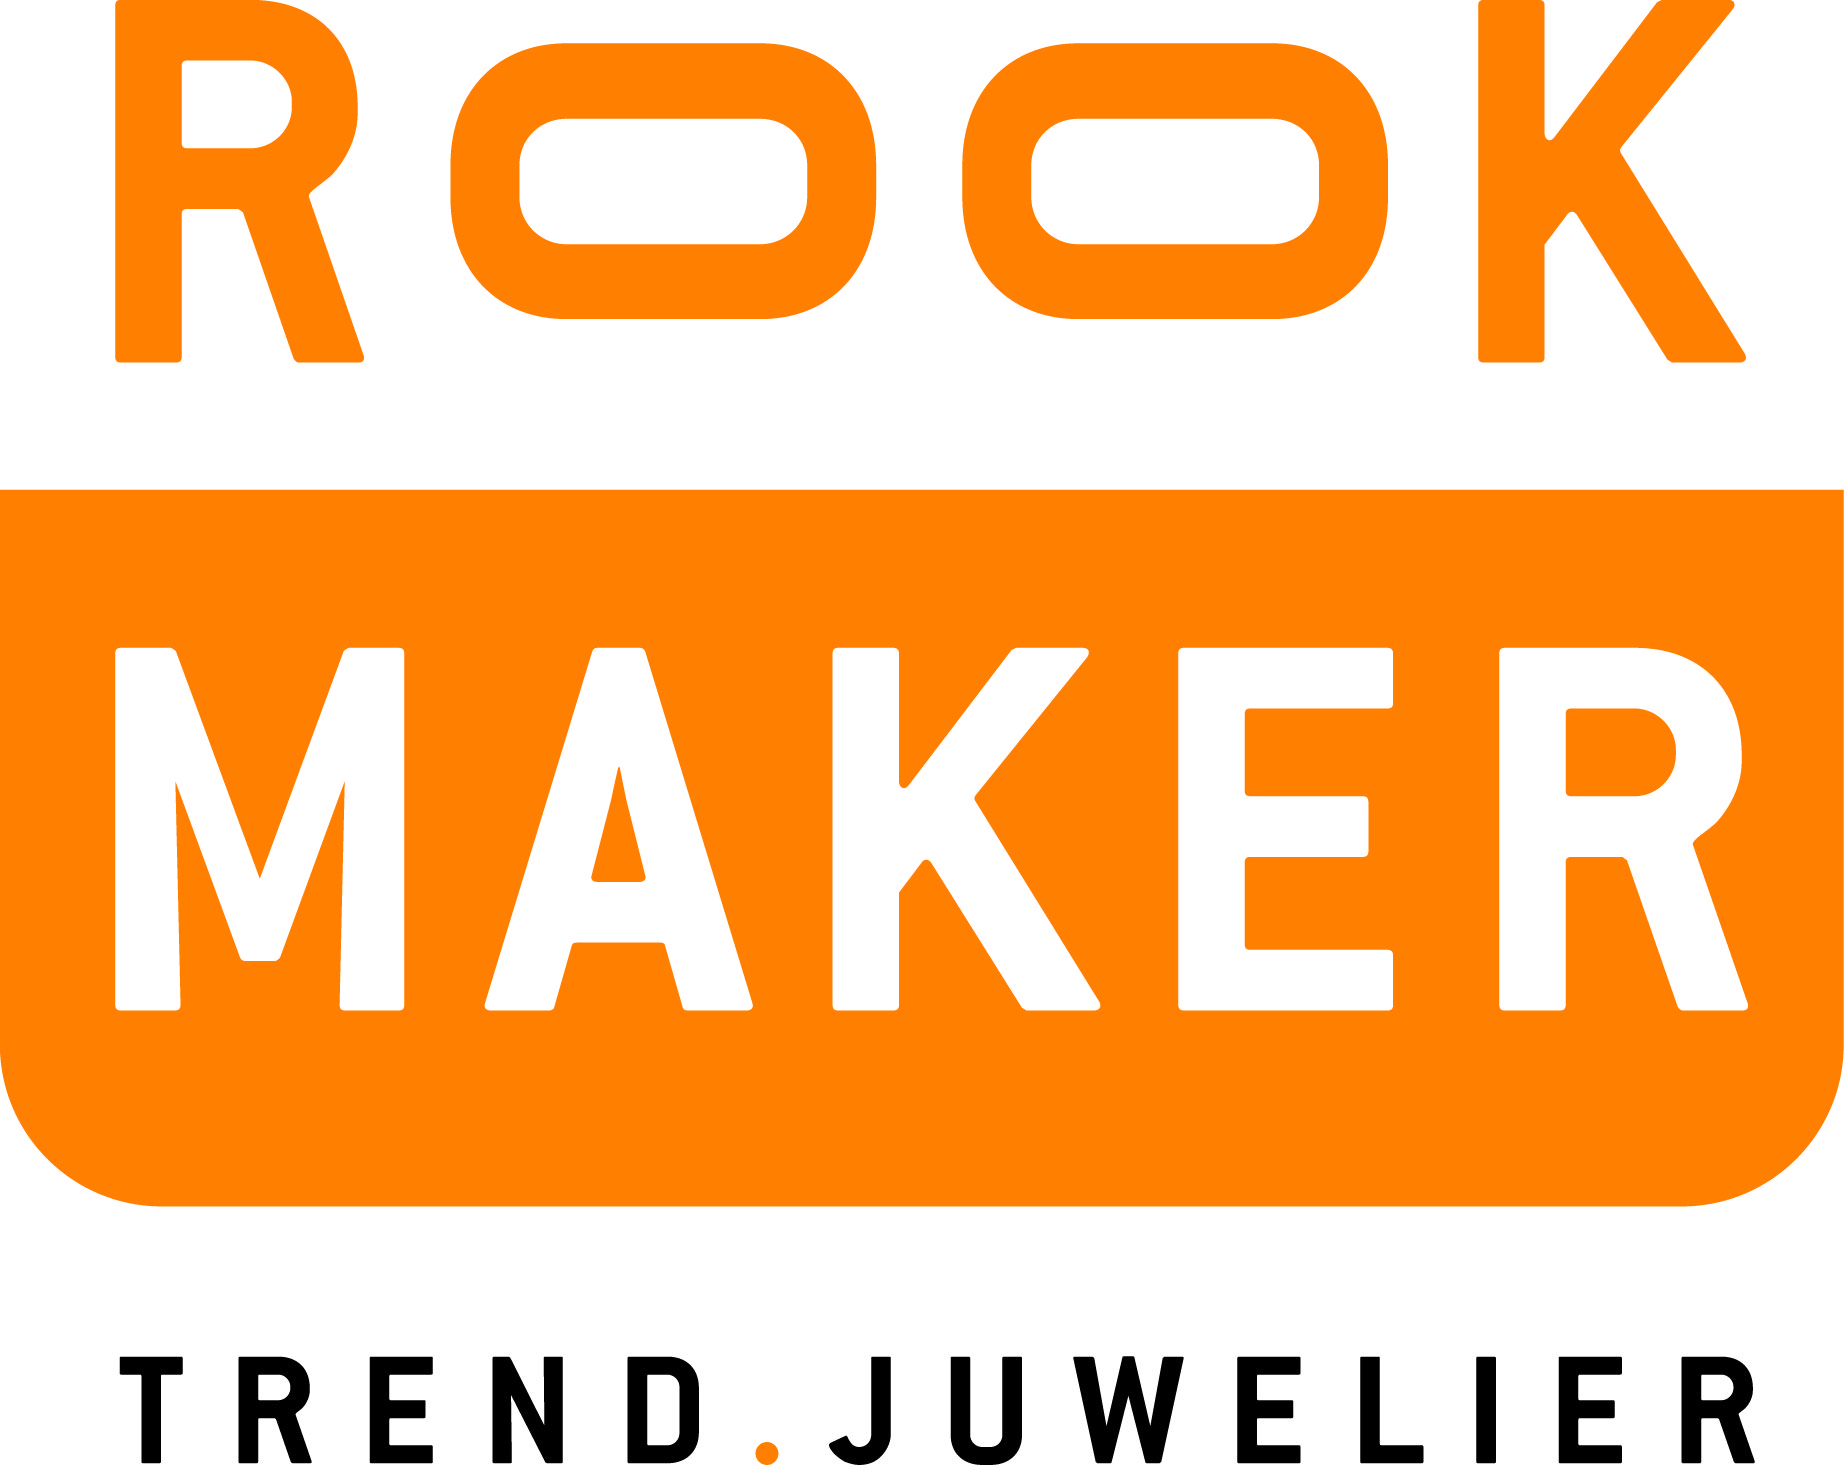 Rookmaker